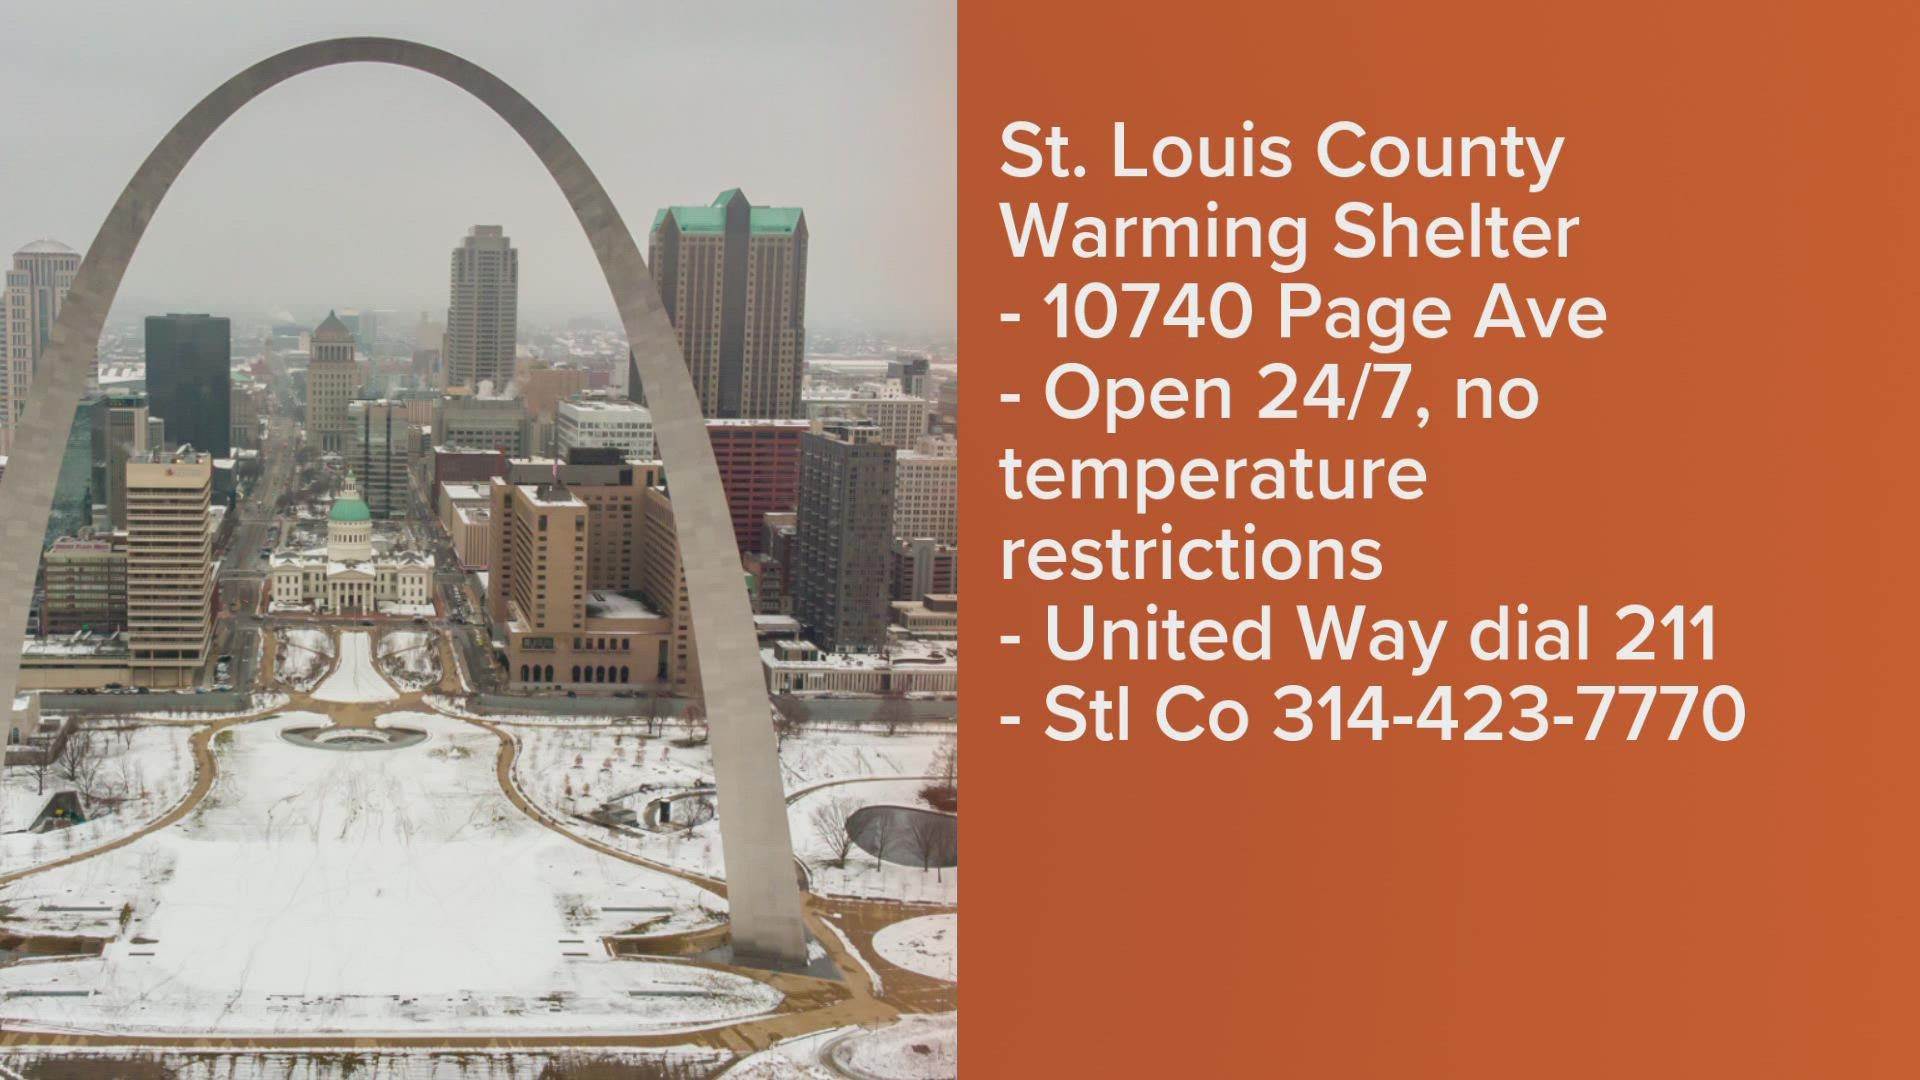 Warming shelters are opening up serve the St. Louis community during the winter months.